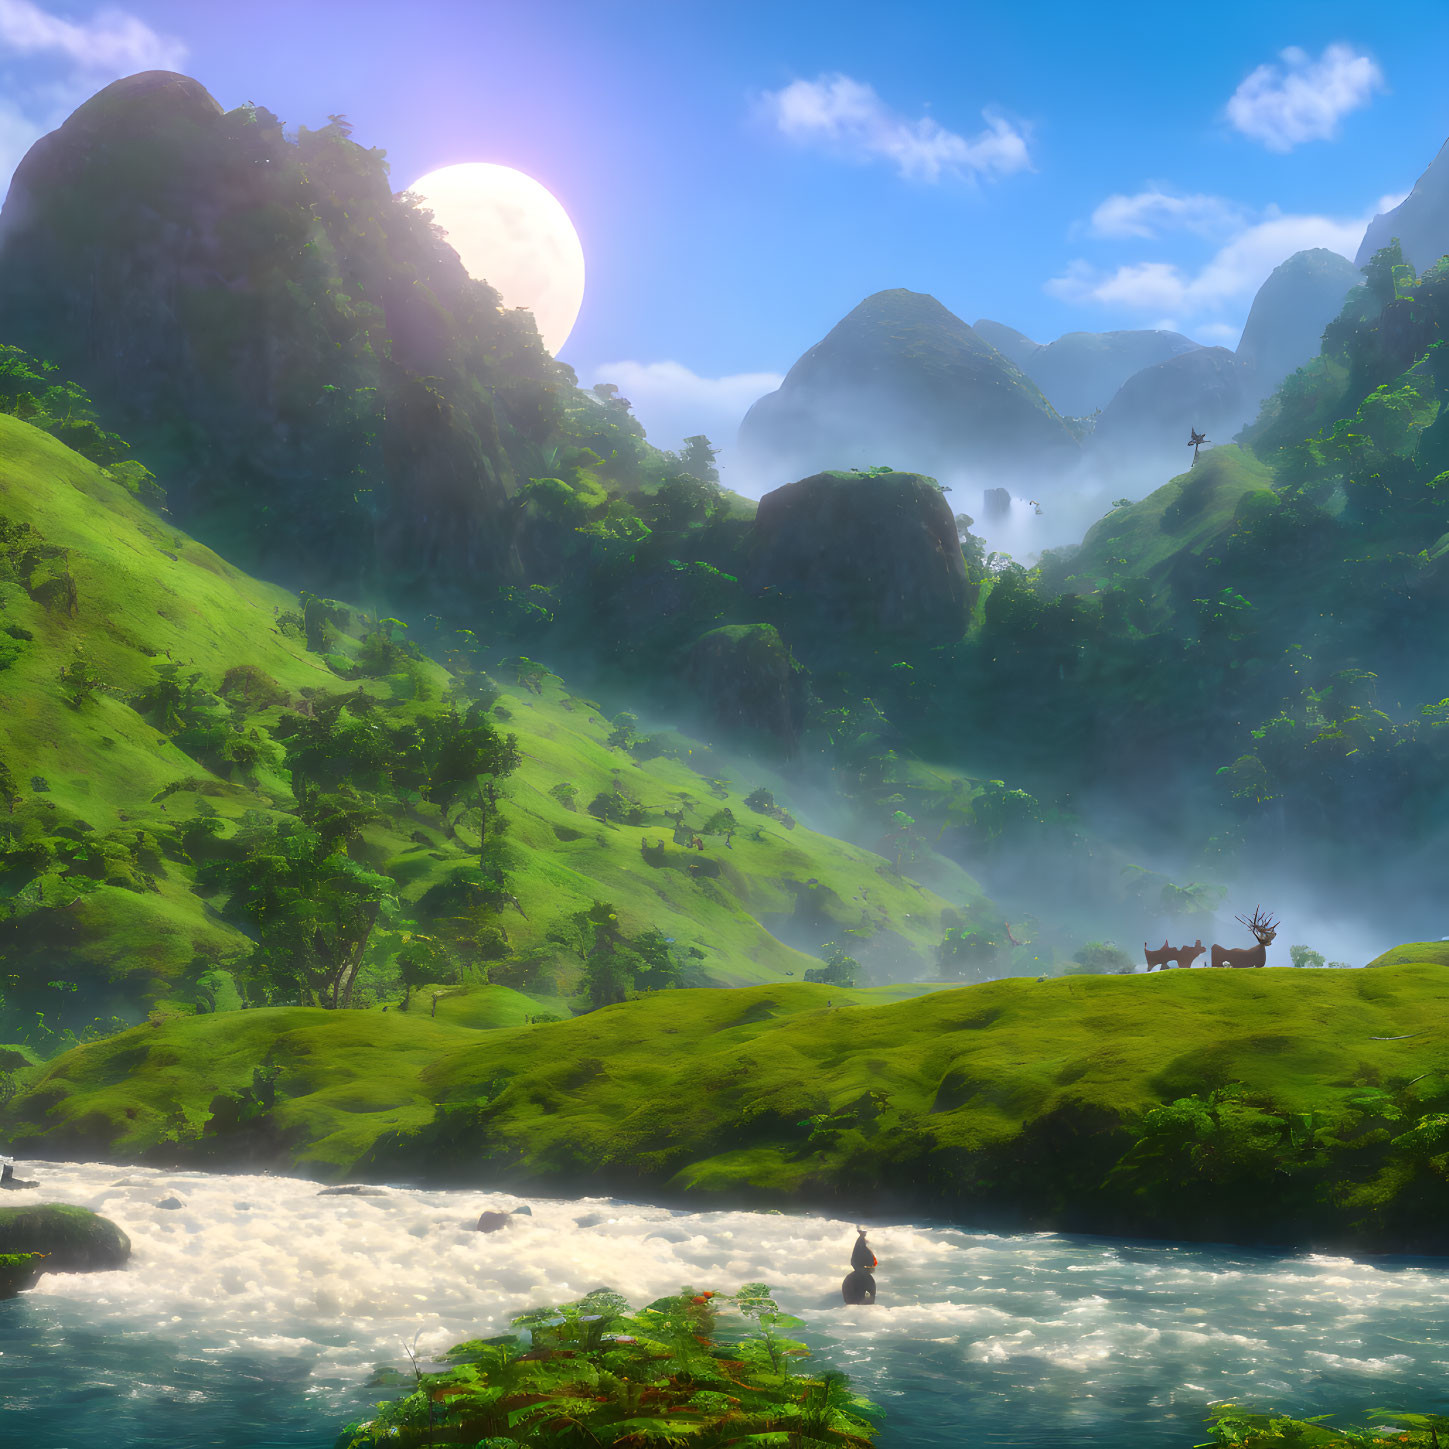 Fantasy landscape with vibrant river, moon, misty mountains, and creatures